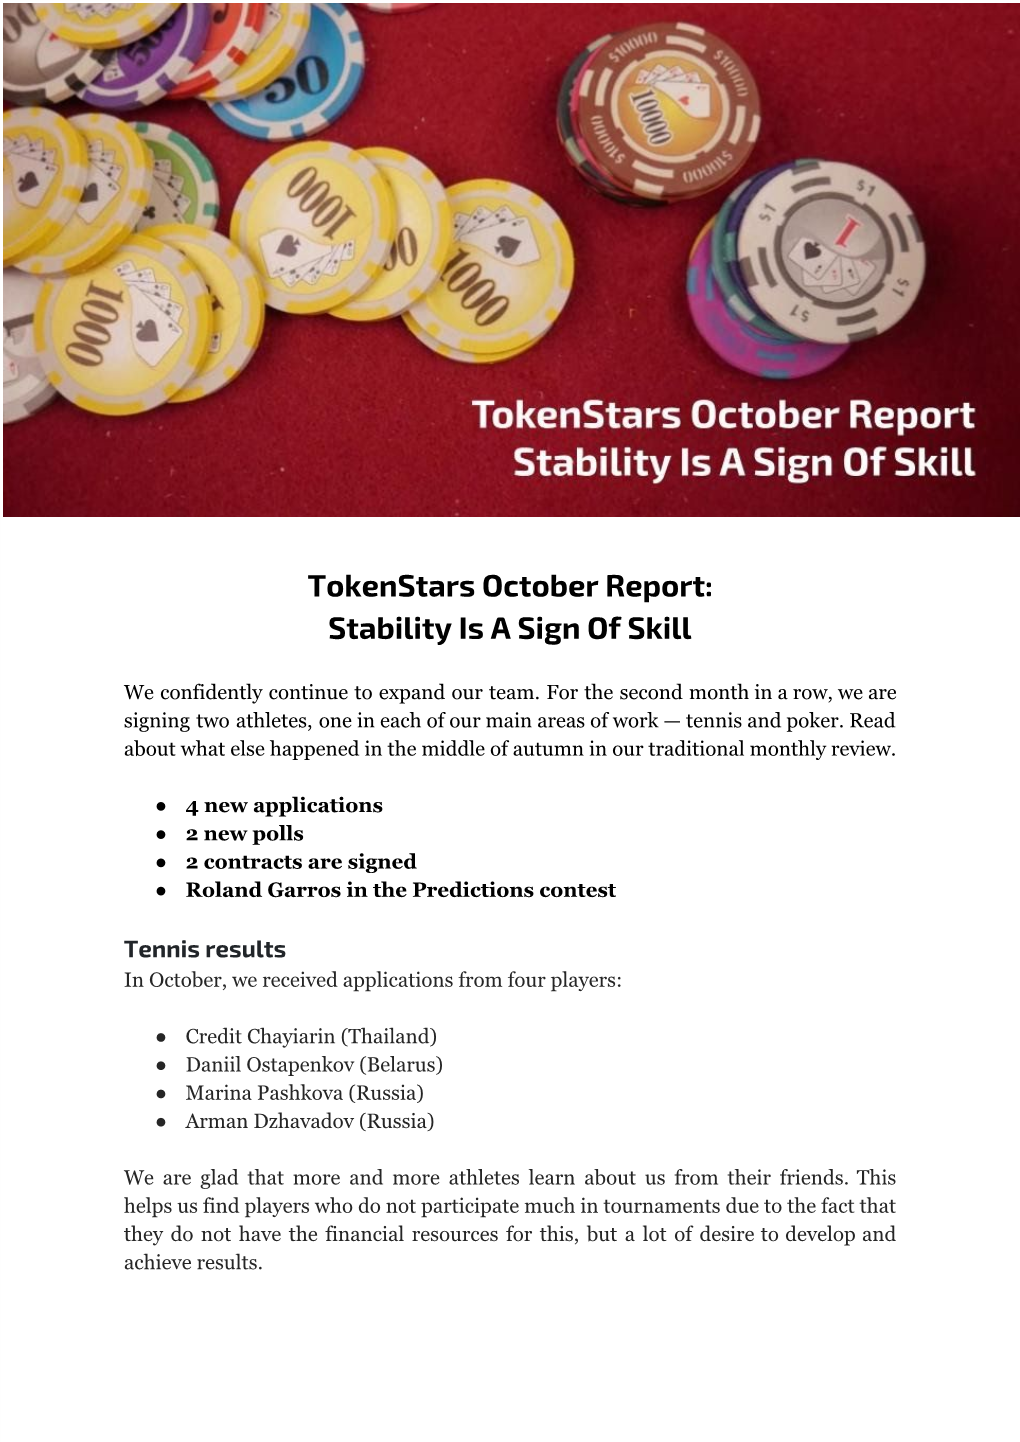 Tokenstars October Report: Stability Is a Sign of Skill